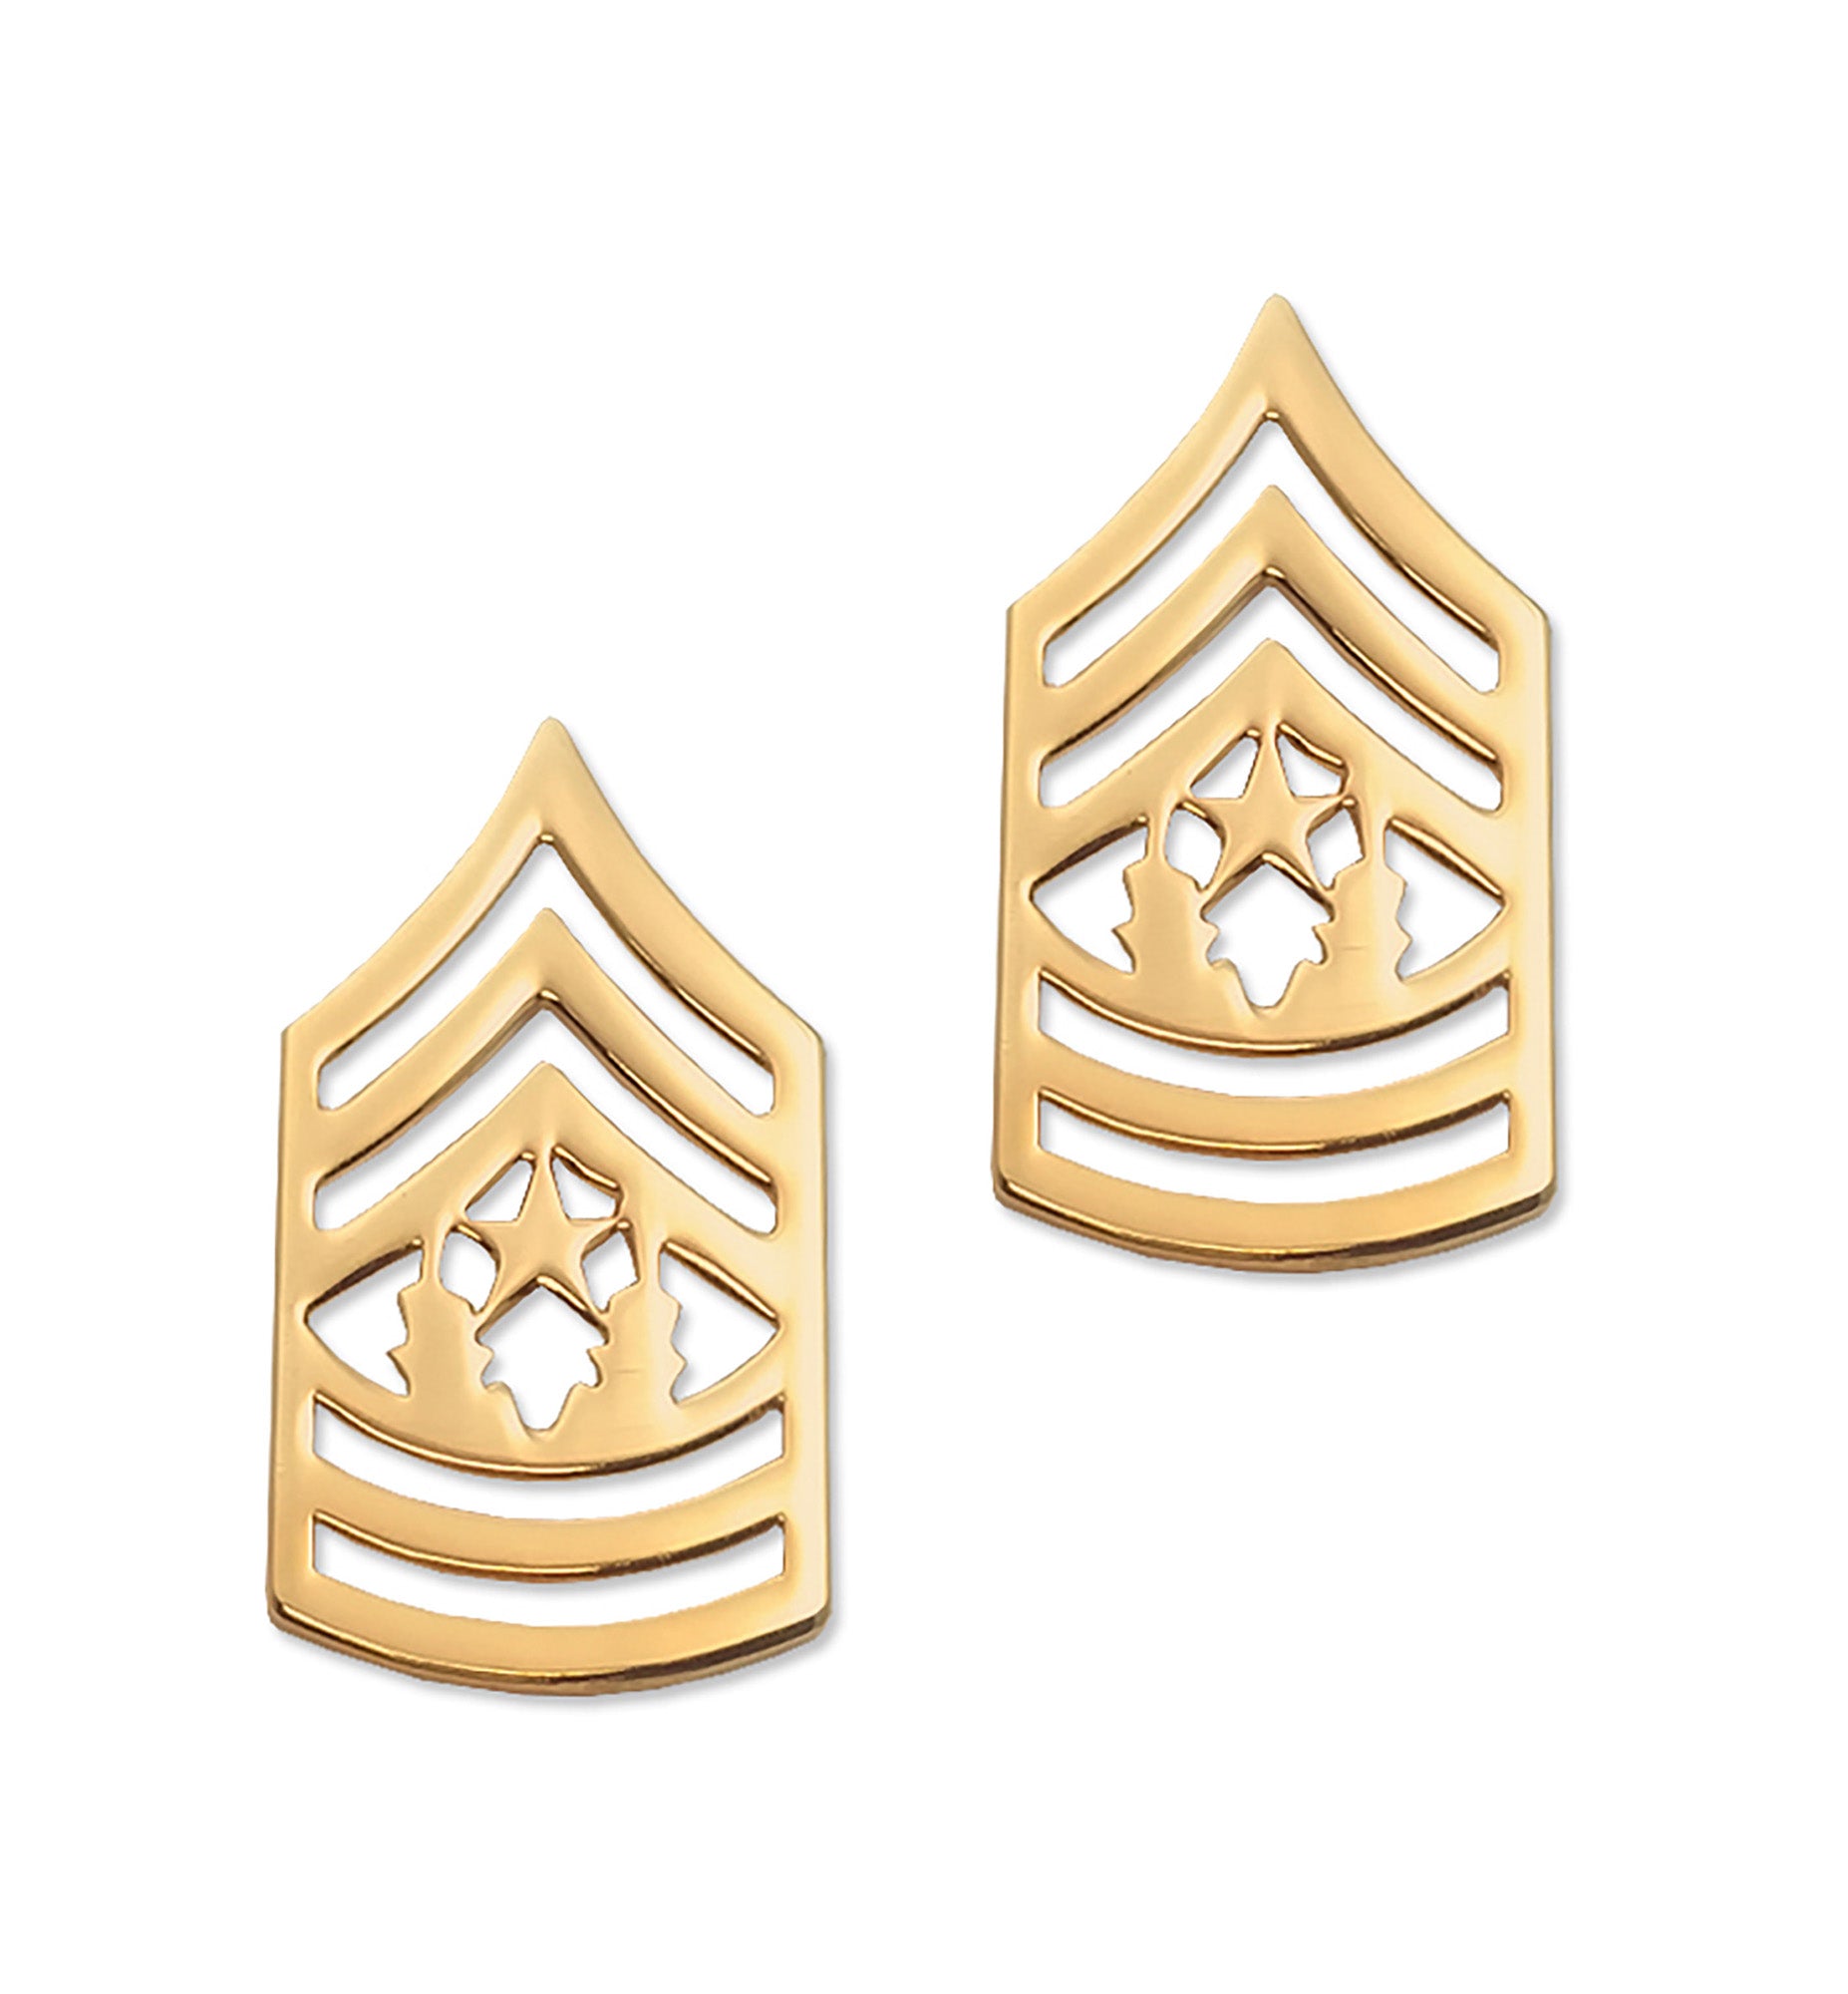 sergeant major of the army rank